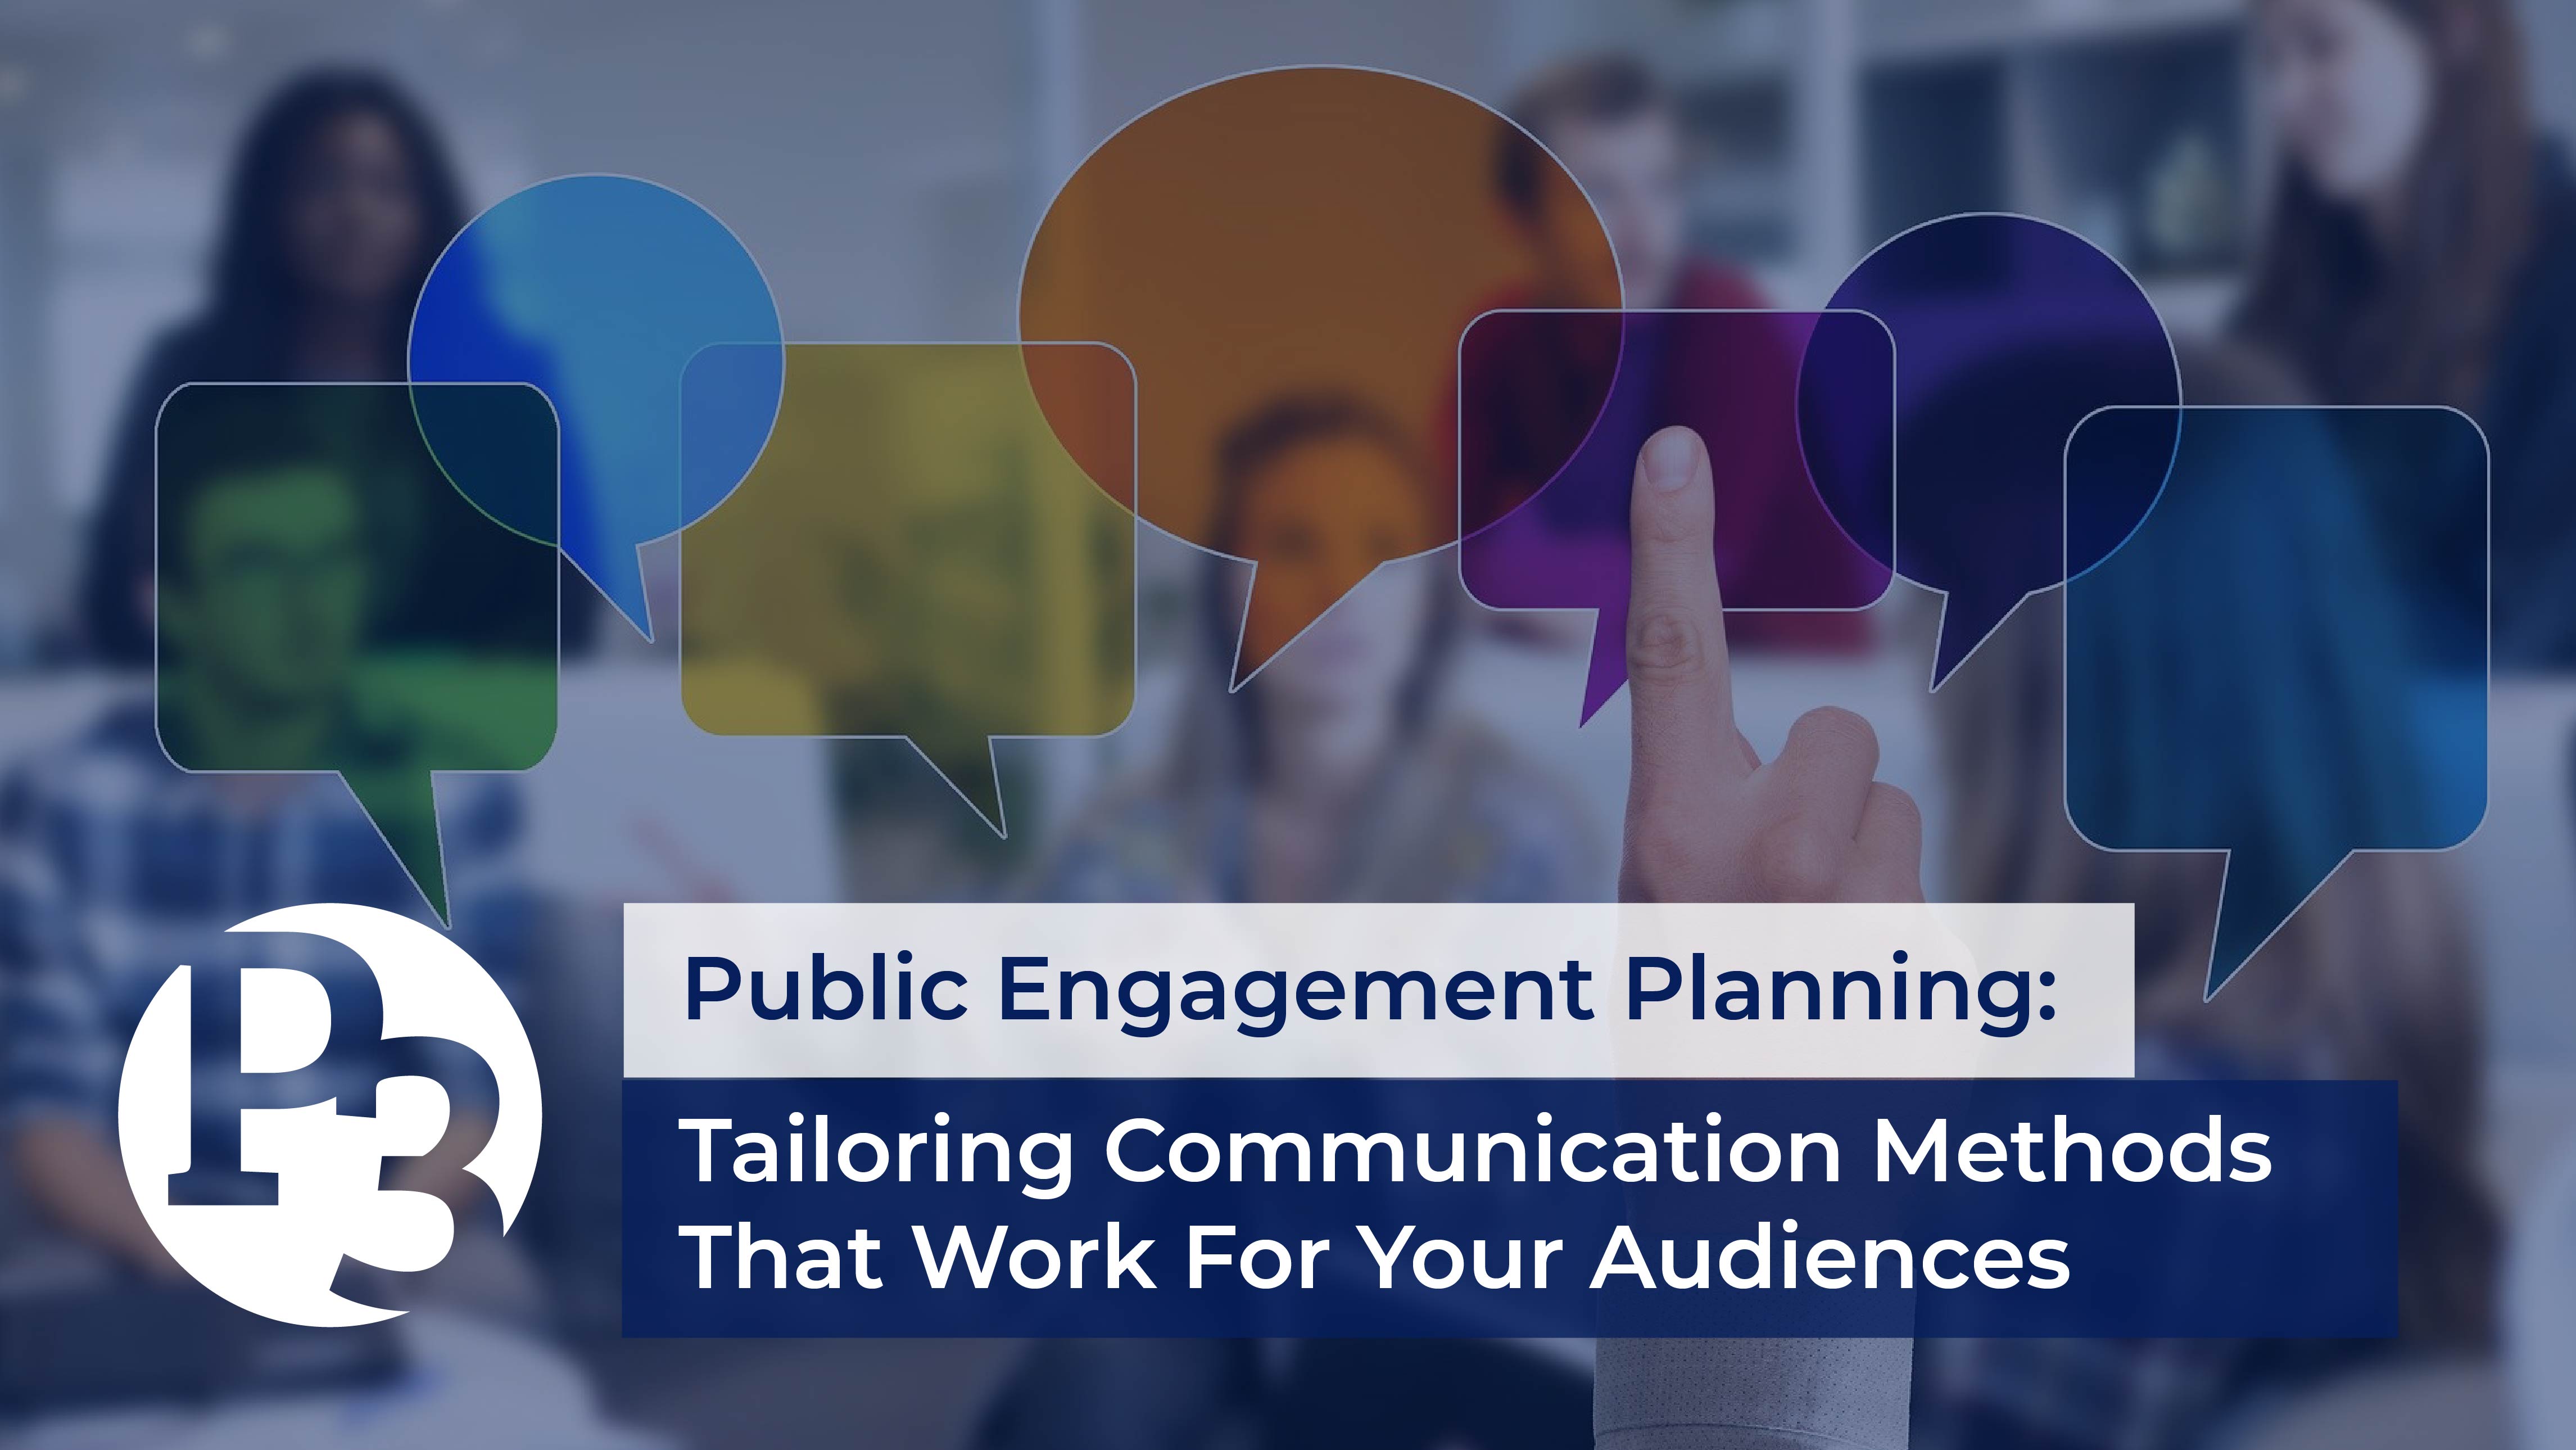 Public Engagement Planning: Tailoring Communication Methods That Work For Your Audiences